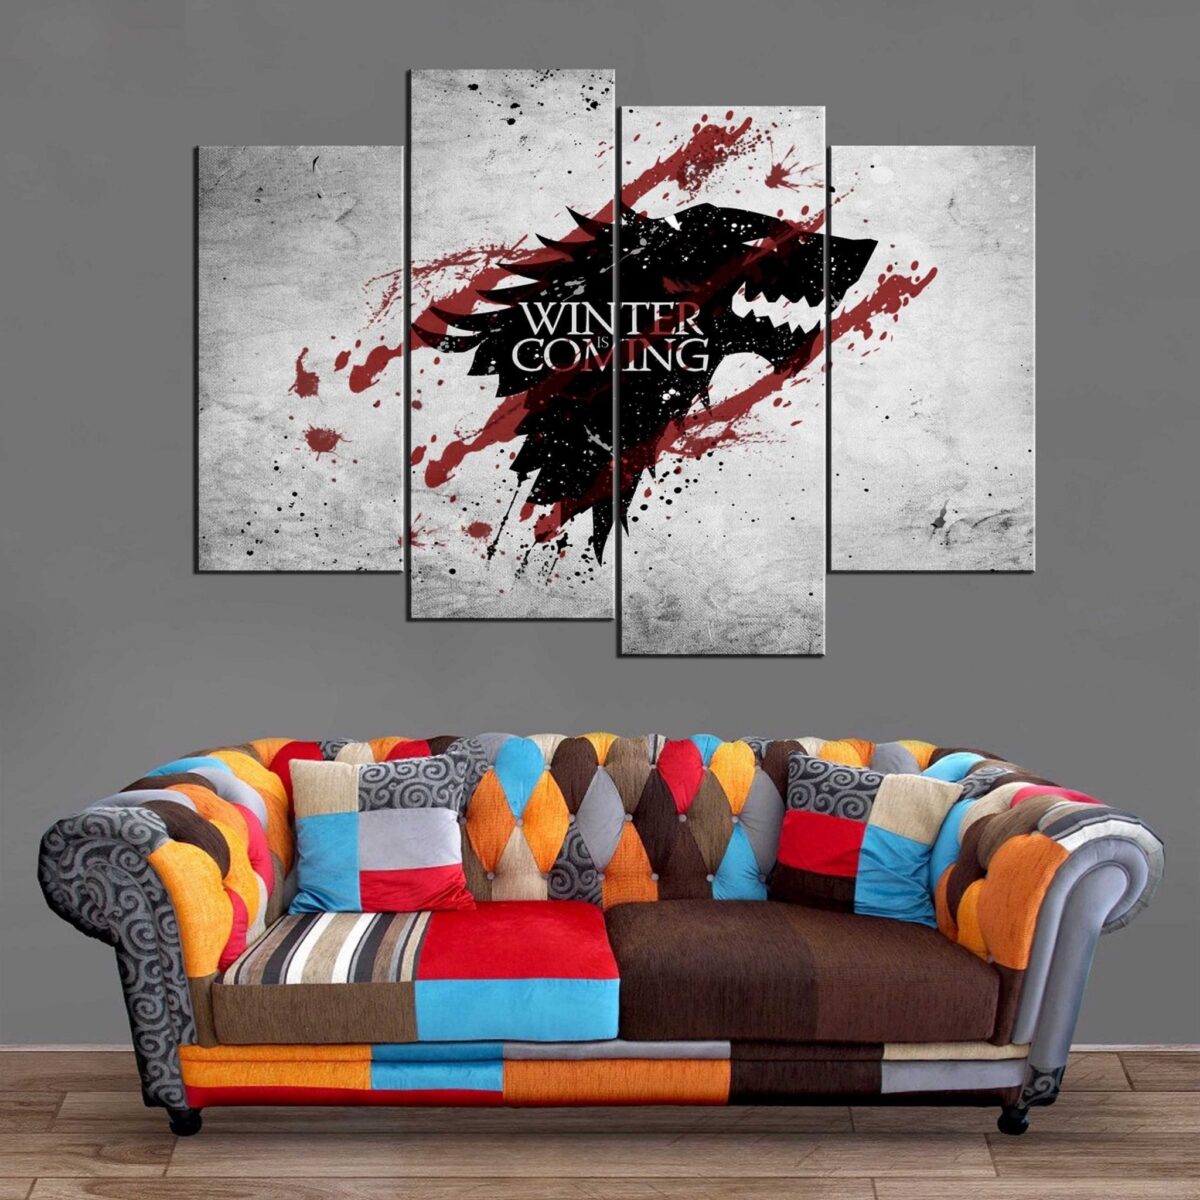 Décoration Murale Games Of Thrones Winter is Coming